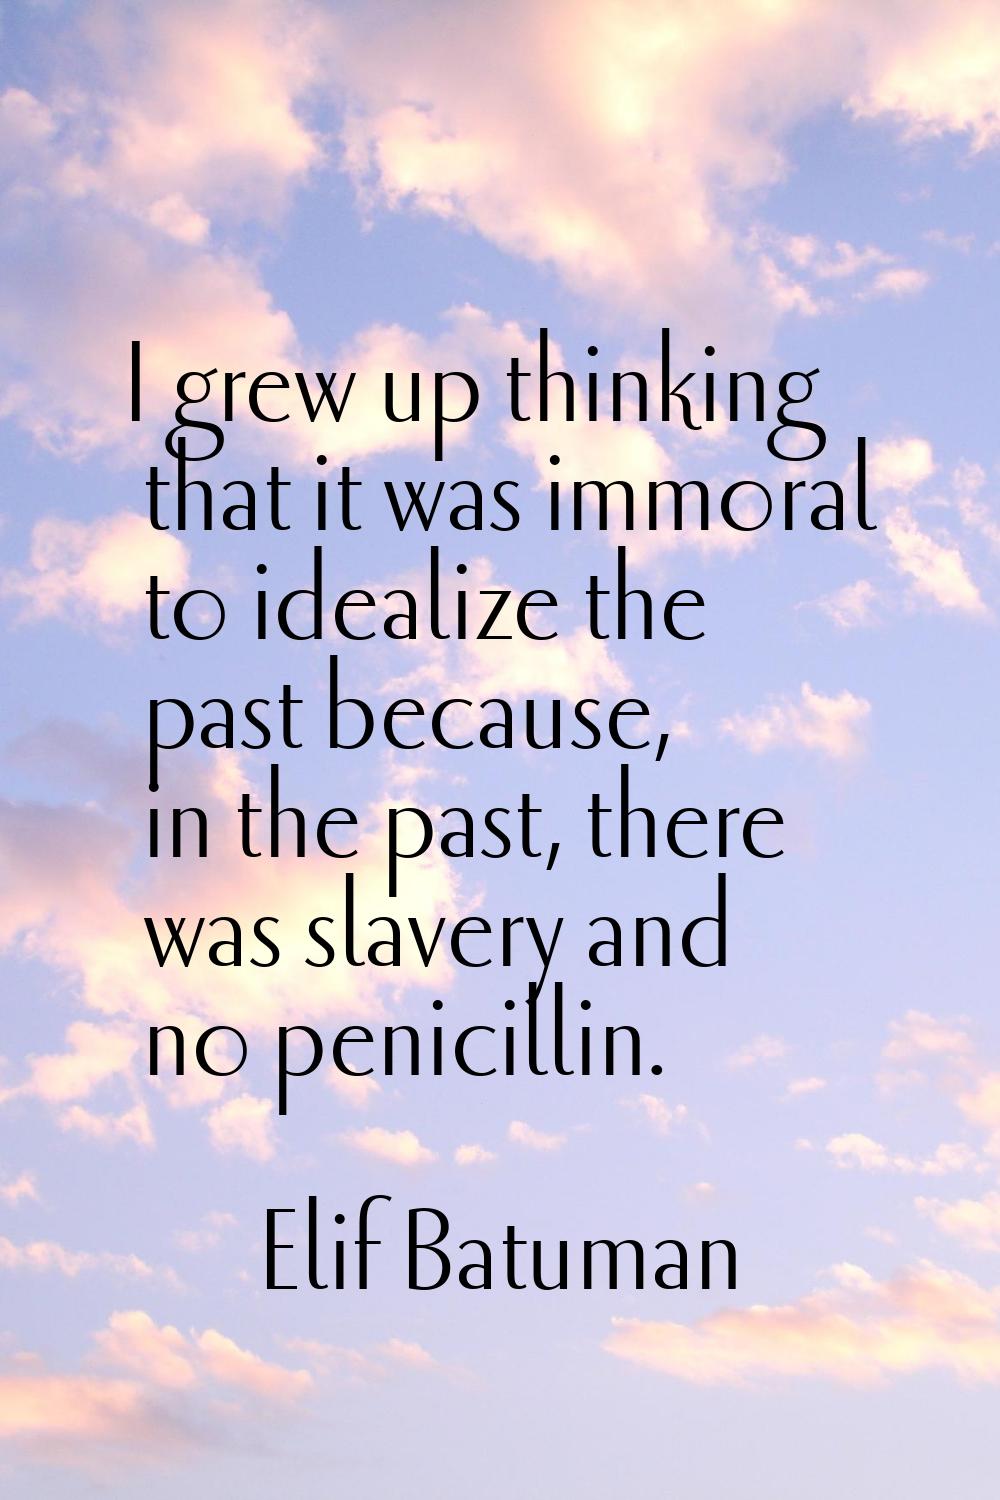 I grew up thinking that it was immoral to idealize the past because, in the past, there was slavery